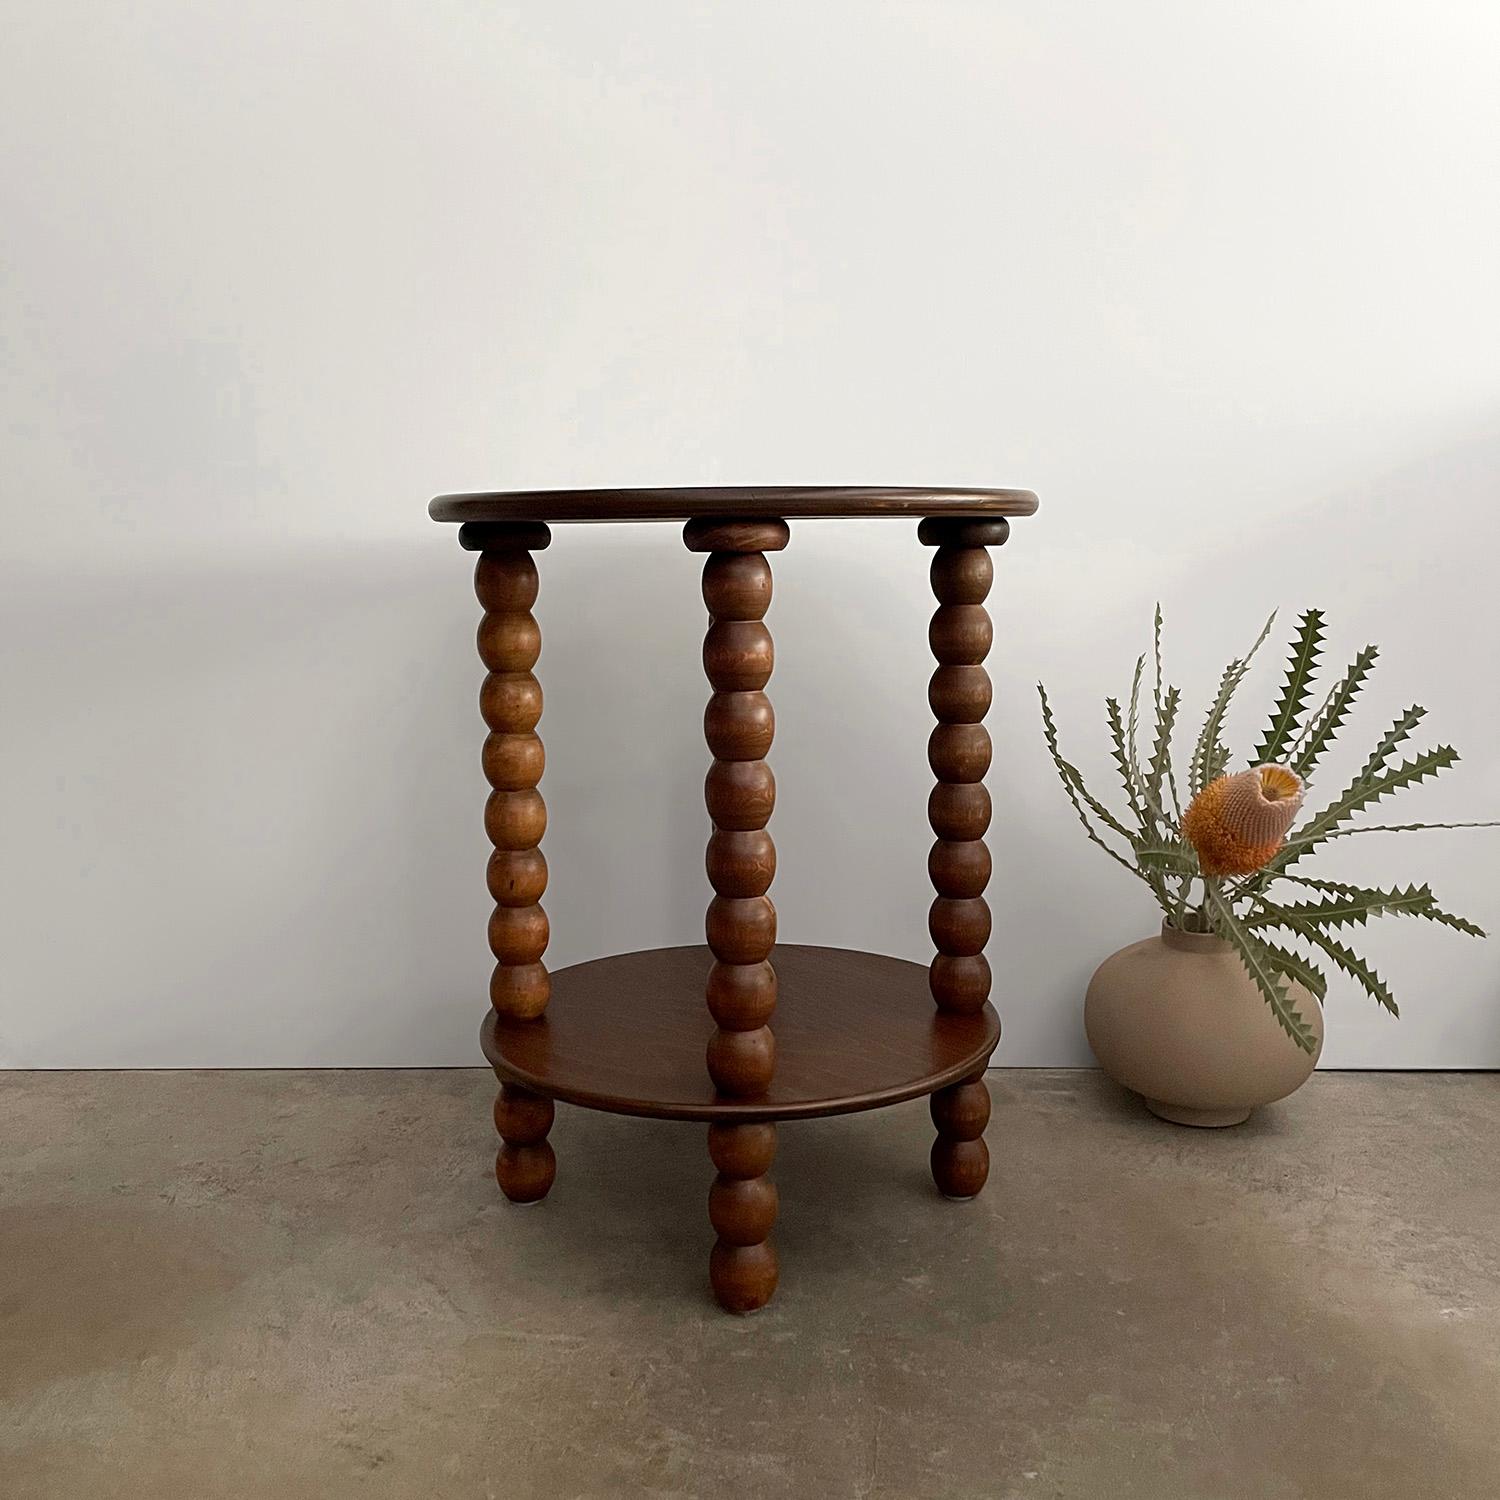 French Bobbin wood table
France, mid century 
Handcrafted artisanal piece 
Solid wood rounded edge top is supported by four whimsical turned wood posts 
Beautiful wood grain and natural color variations throughout
Bottom portion of the table